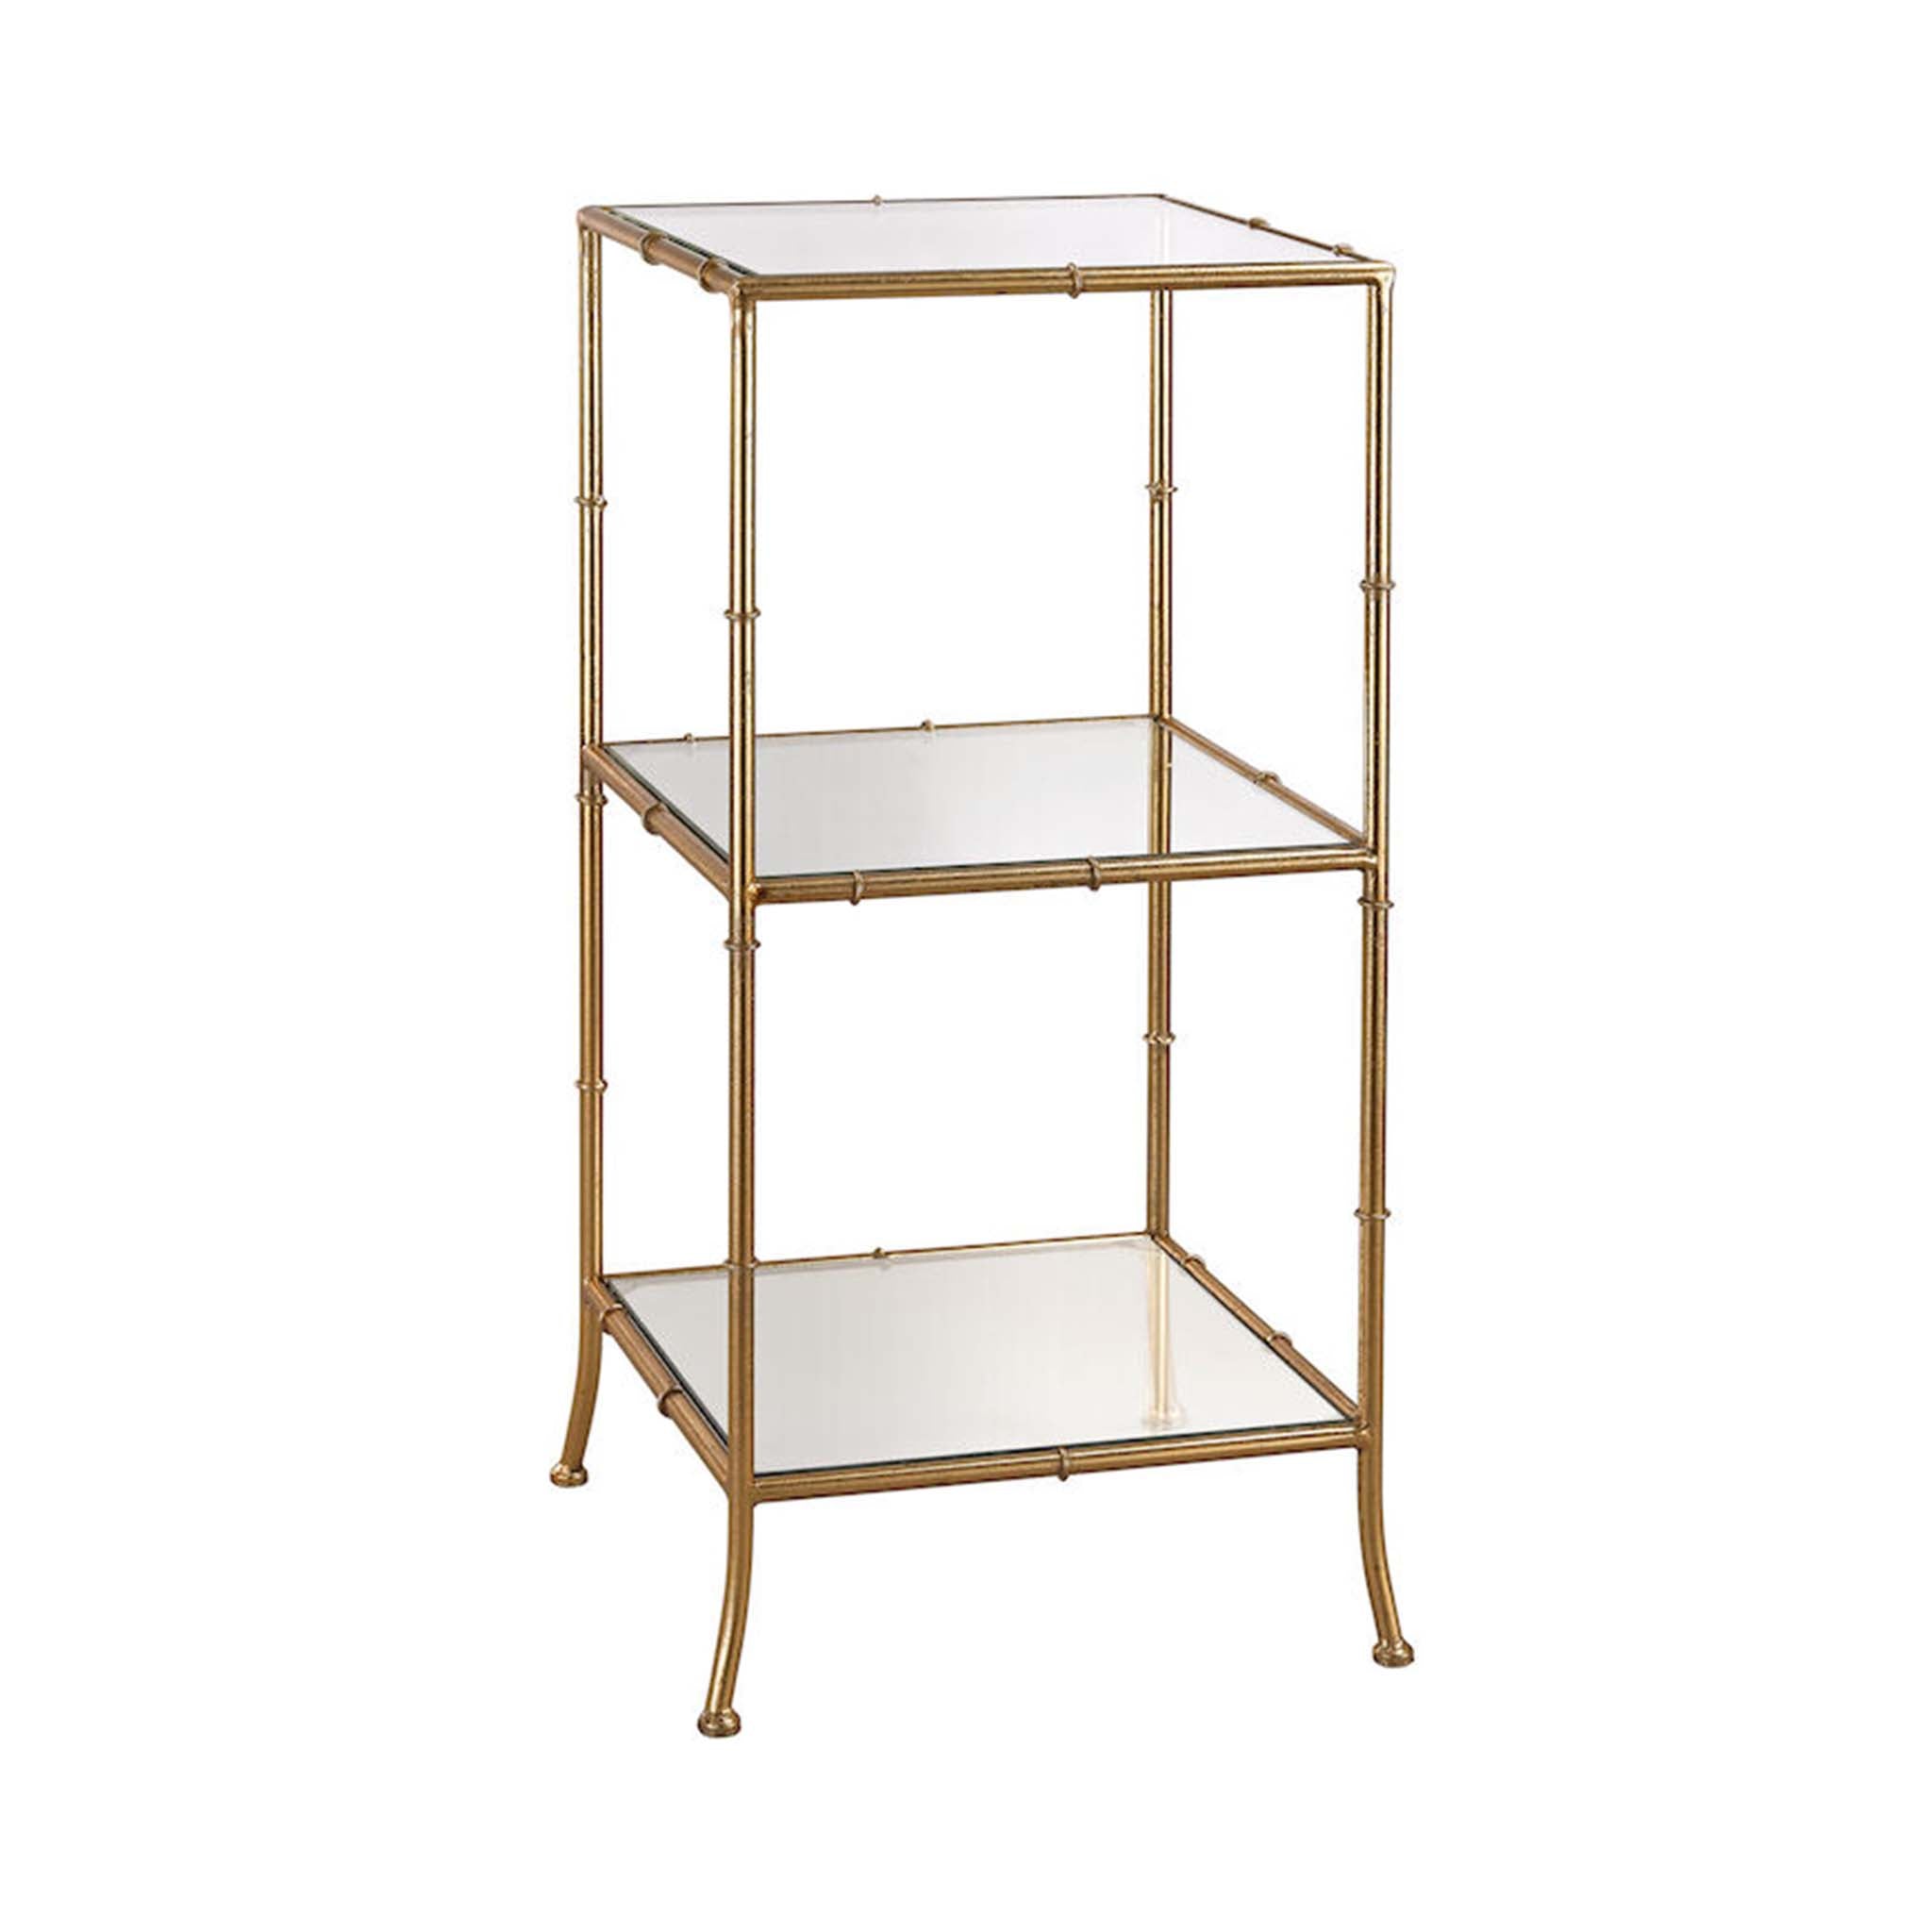 Mirrored Tiers Side Table